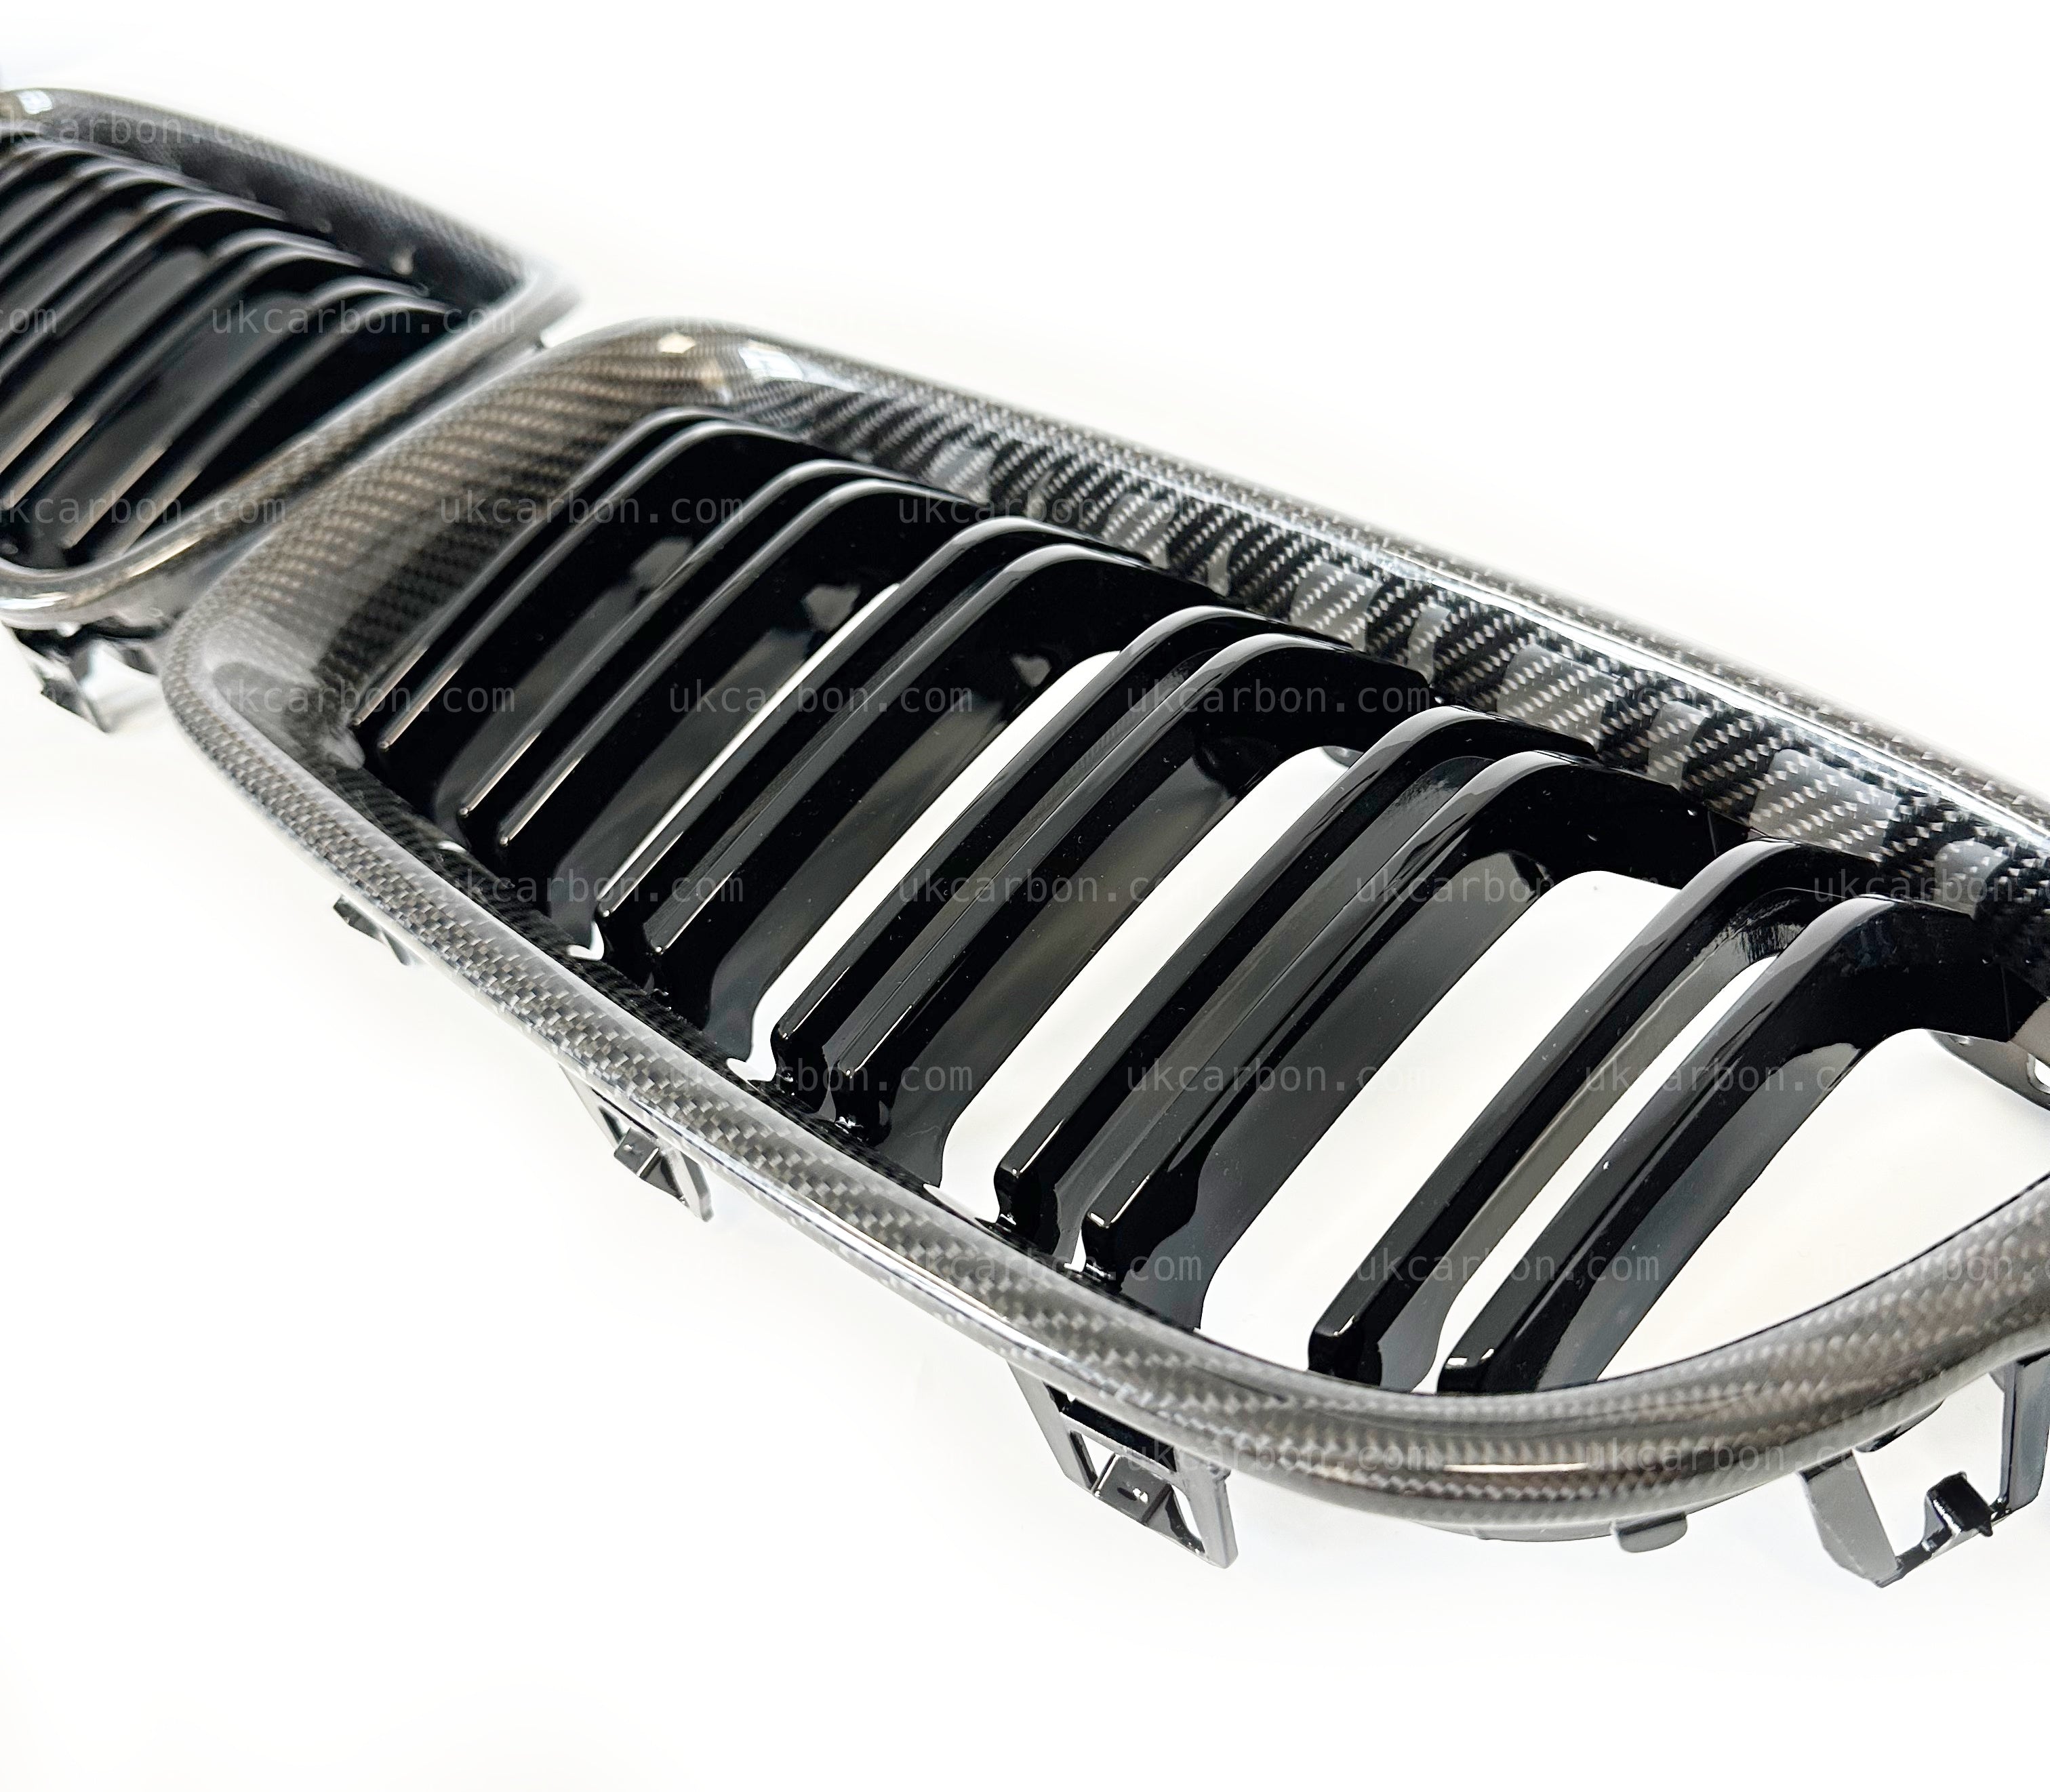 BMW 3 Series Grille Carbon Fibre F30 F31 Gloss Black M Performance by UKCarbon